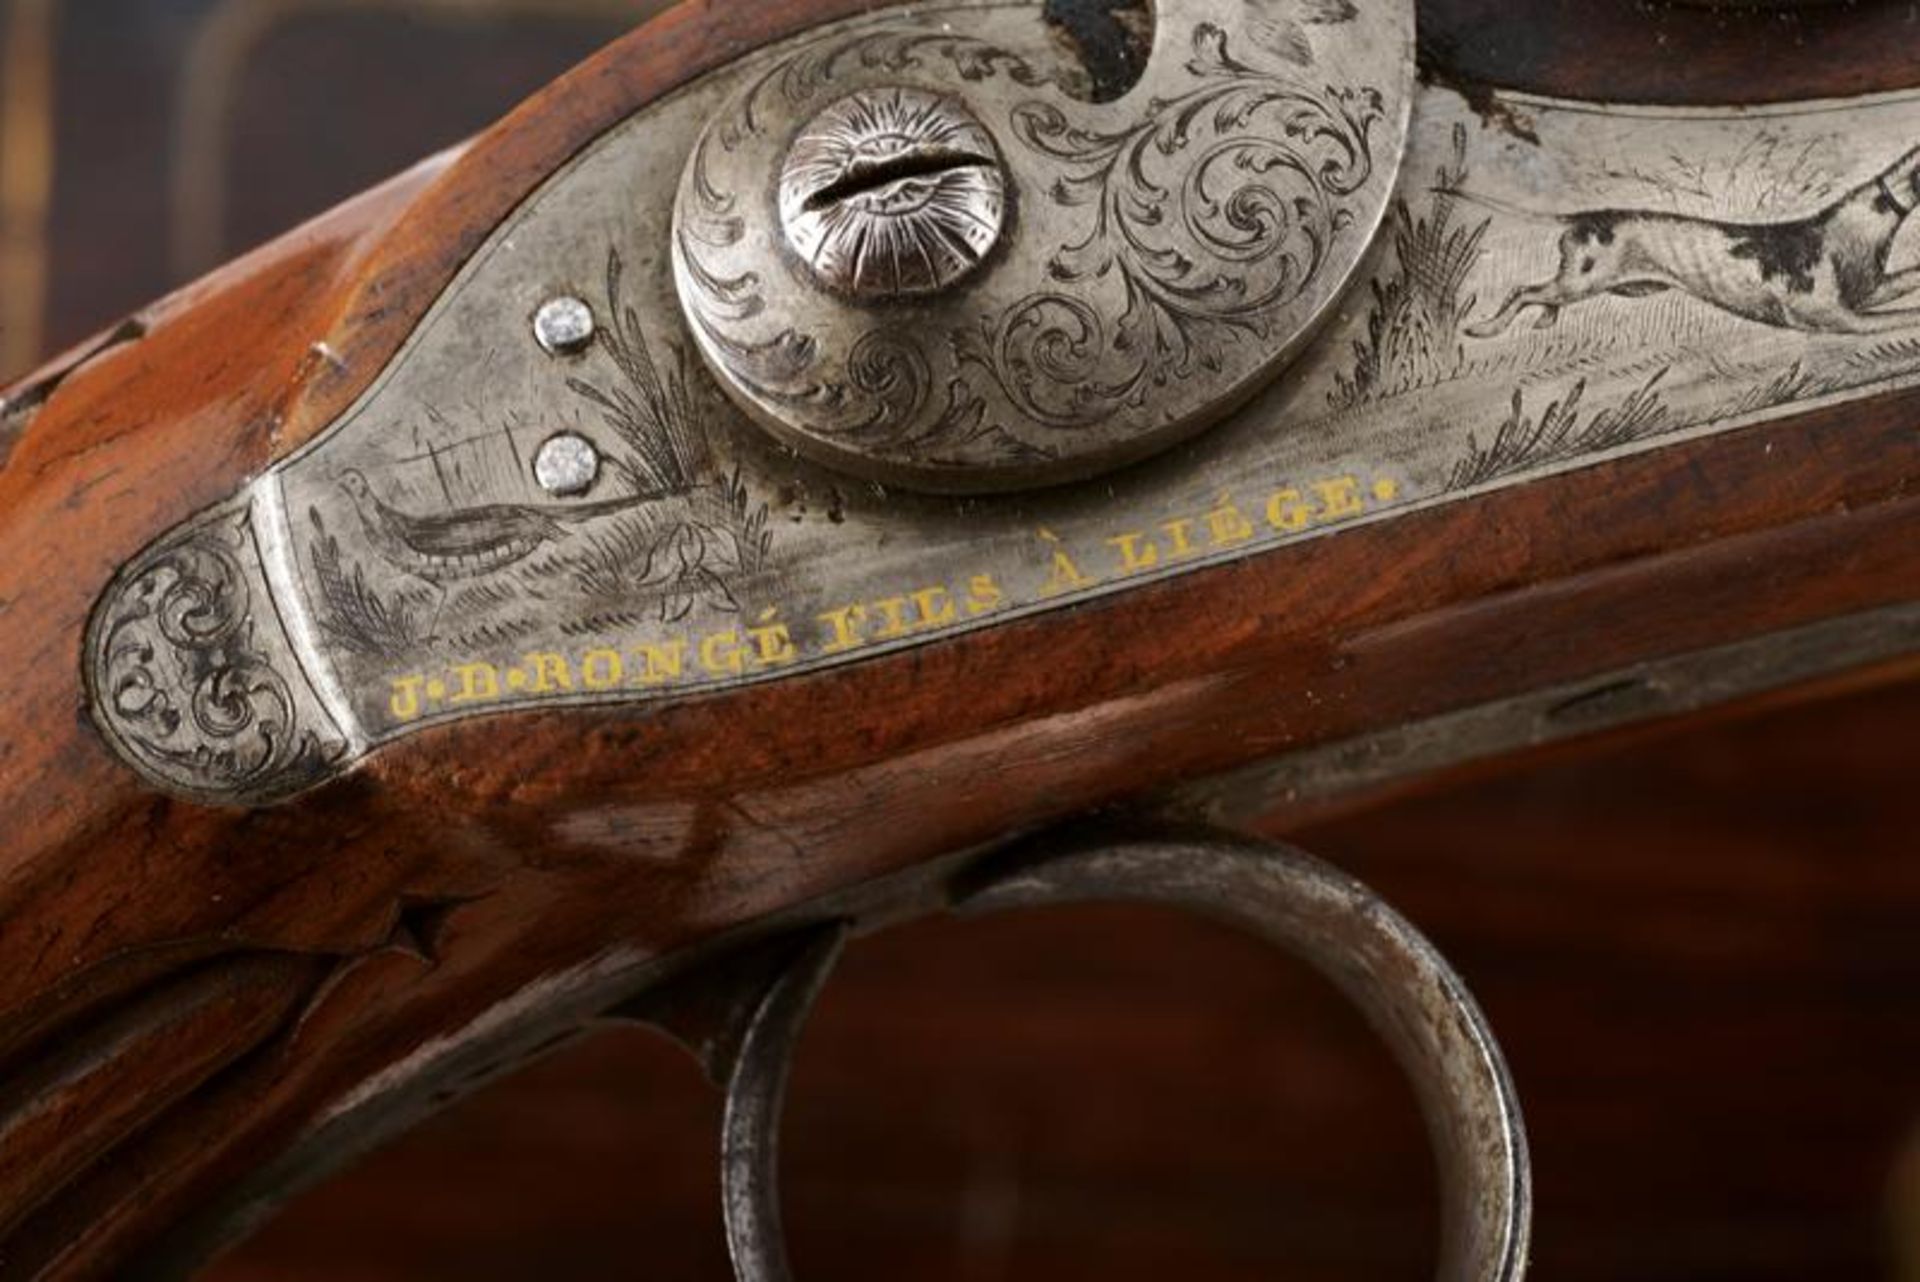 A fine pair of cased percussion pistols by J. B. Ronge, shooting tournament 1st price - Image 5 of 11